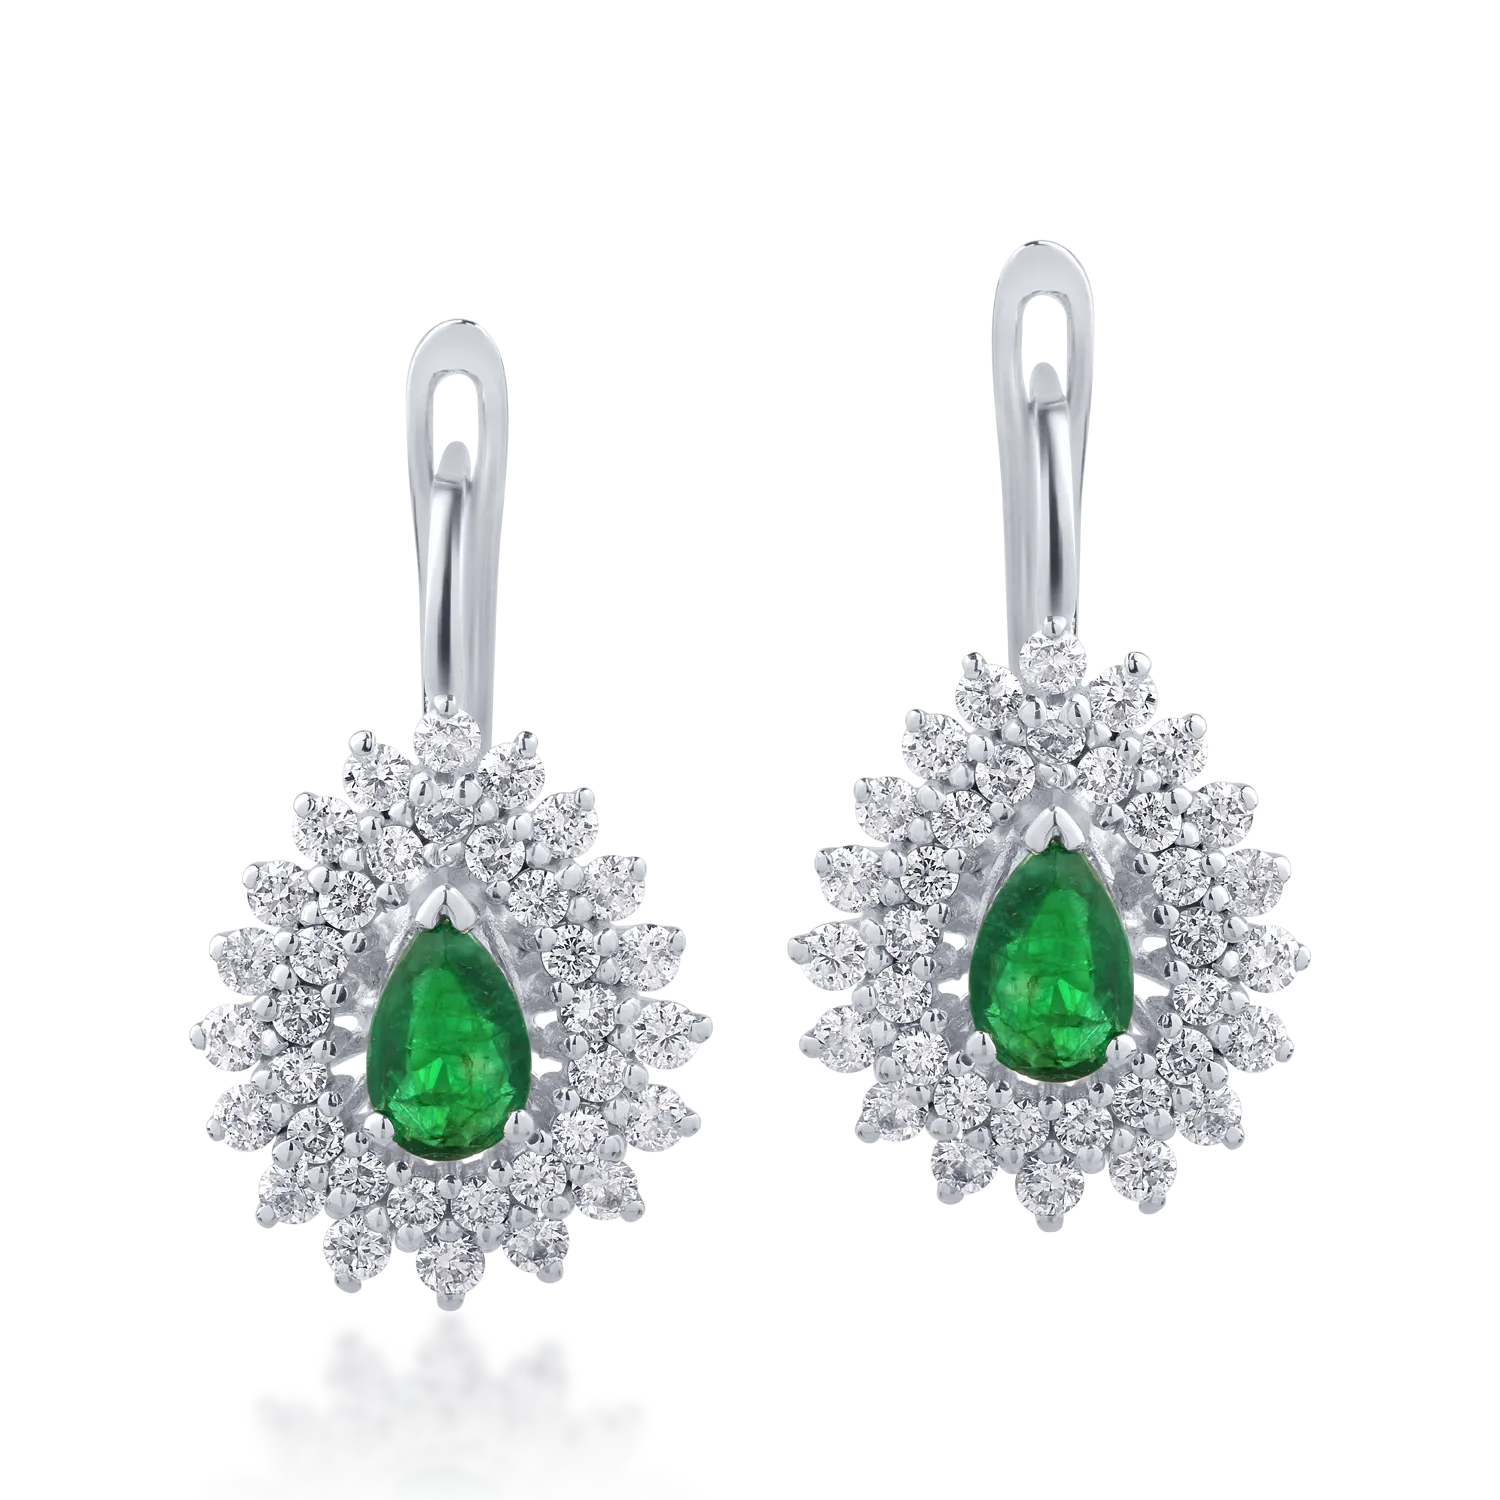 18K white gold earrings with 0.5ct emeralds and 0.9ct diamonds